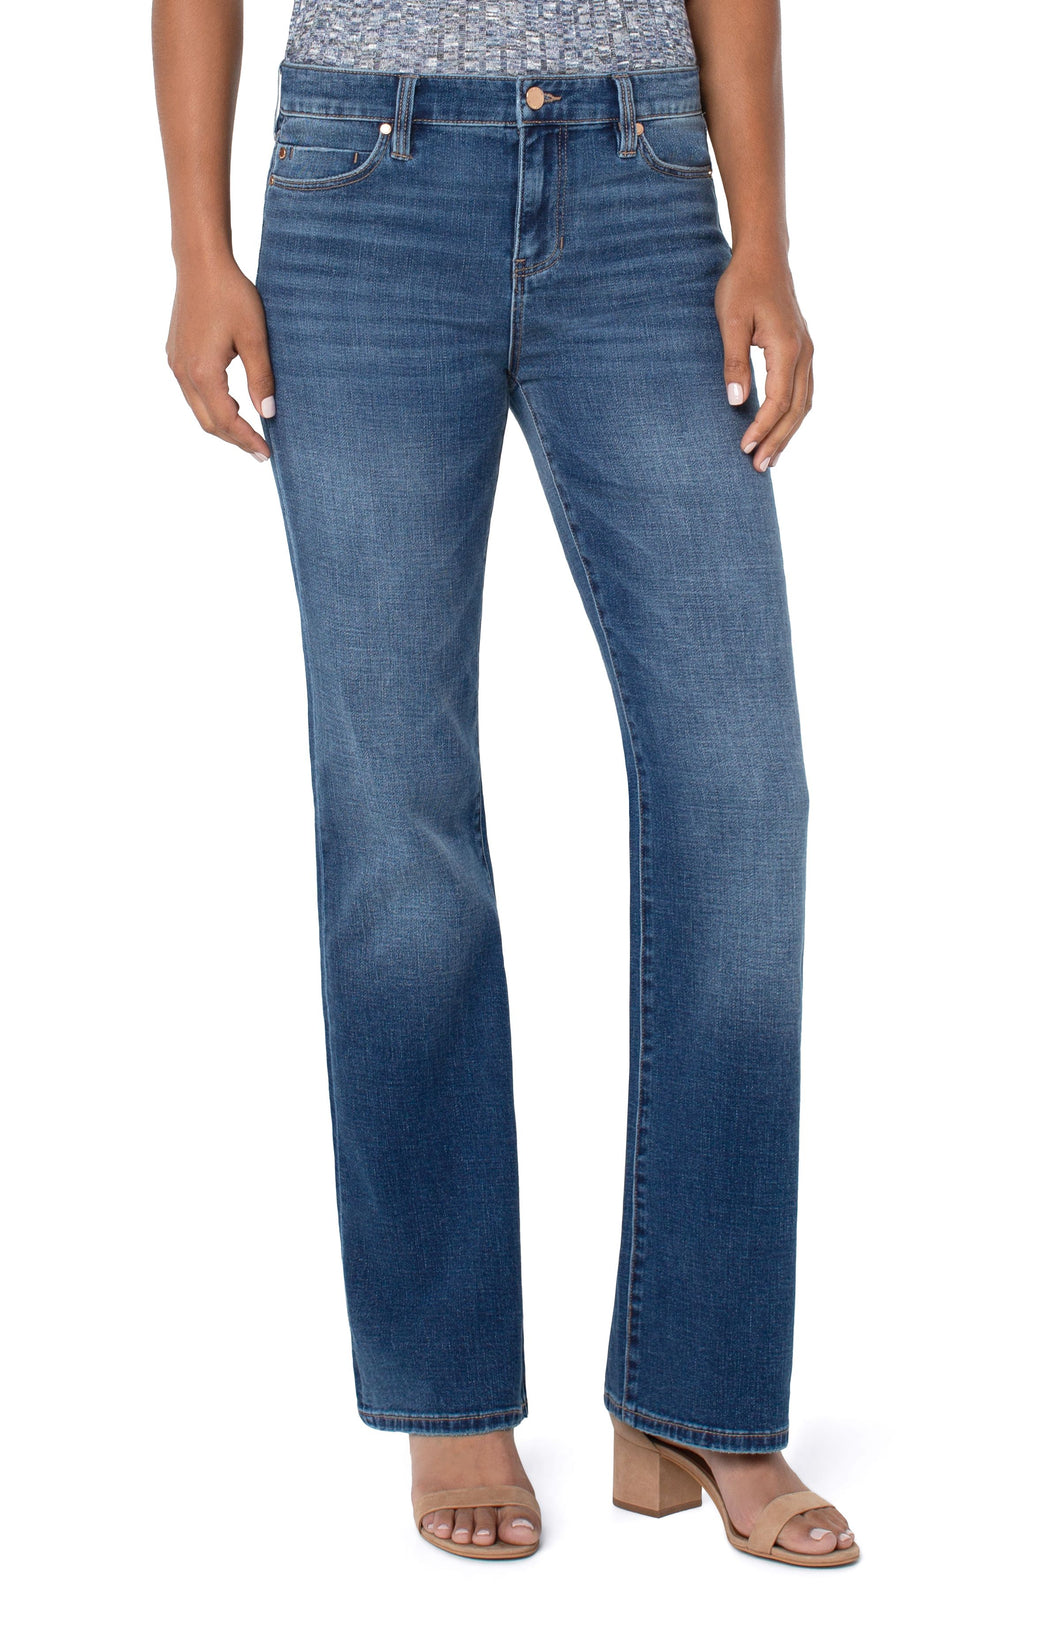 The Lucy bootcut jean is sleek and sophisticated!  This fabulous jean is slimming through the hips and thighs and releases at the knee and leg opening to create the beautiful bootcut shape. Add your favorite top, heeled sandals or boots and you're ready to conquer the day!  Color- Yuba; a rich blue. 32'' Inseam. Five-pocket styling details. Set-in waistband with belt loops.